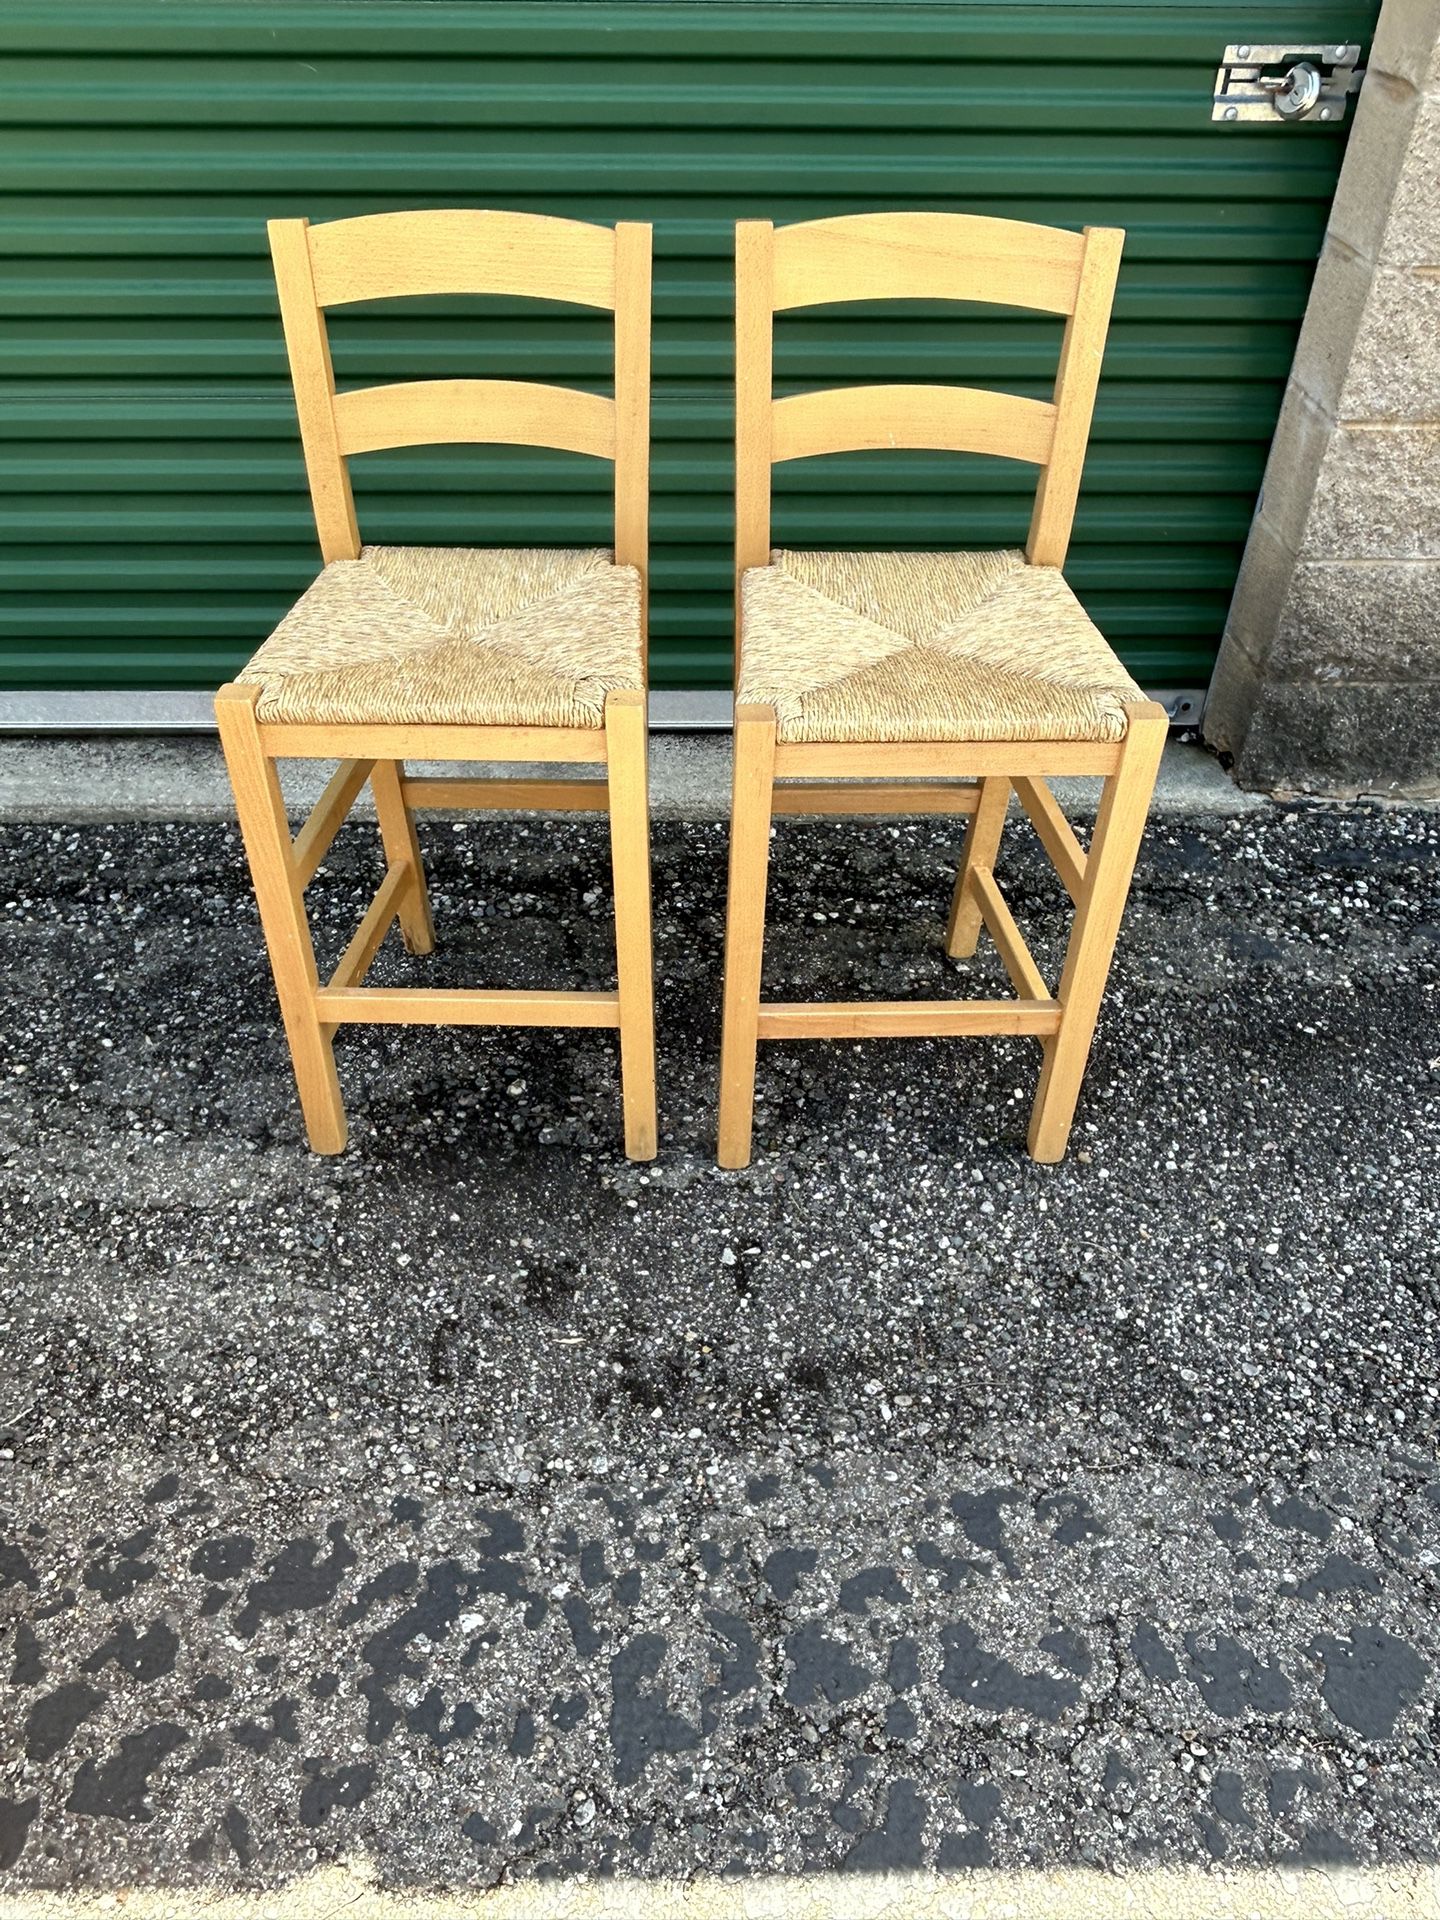 2 Nice Chairs In Great Condition $90 For Both 